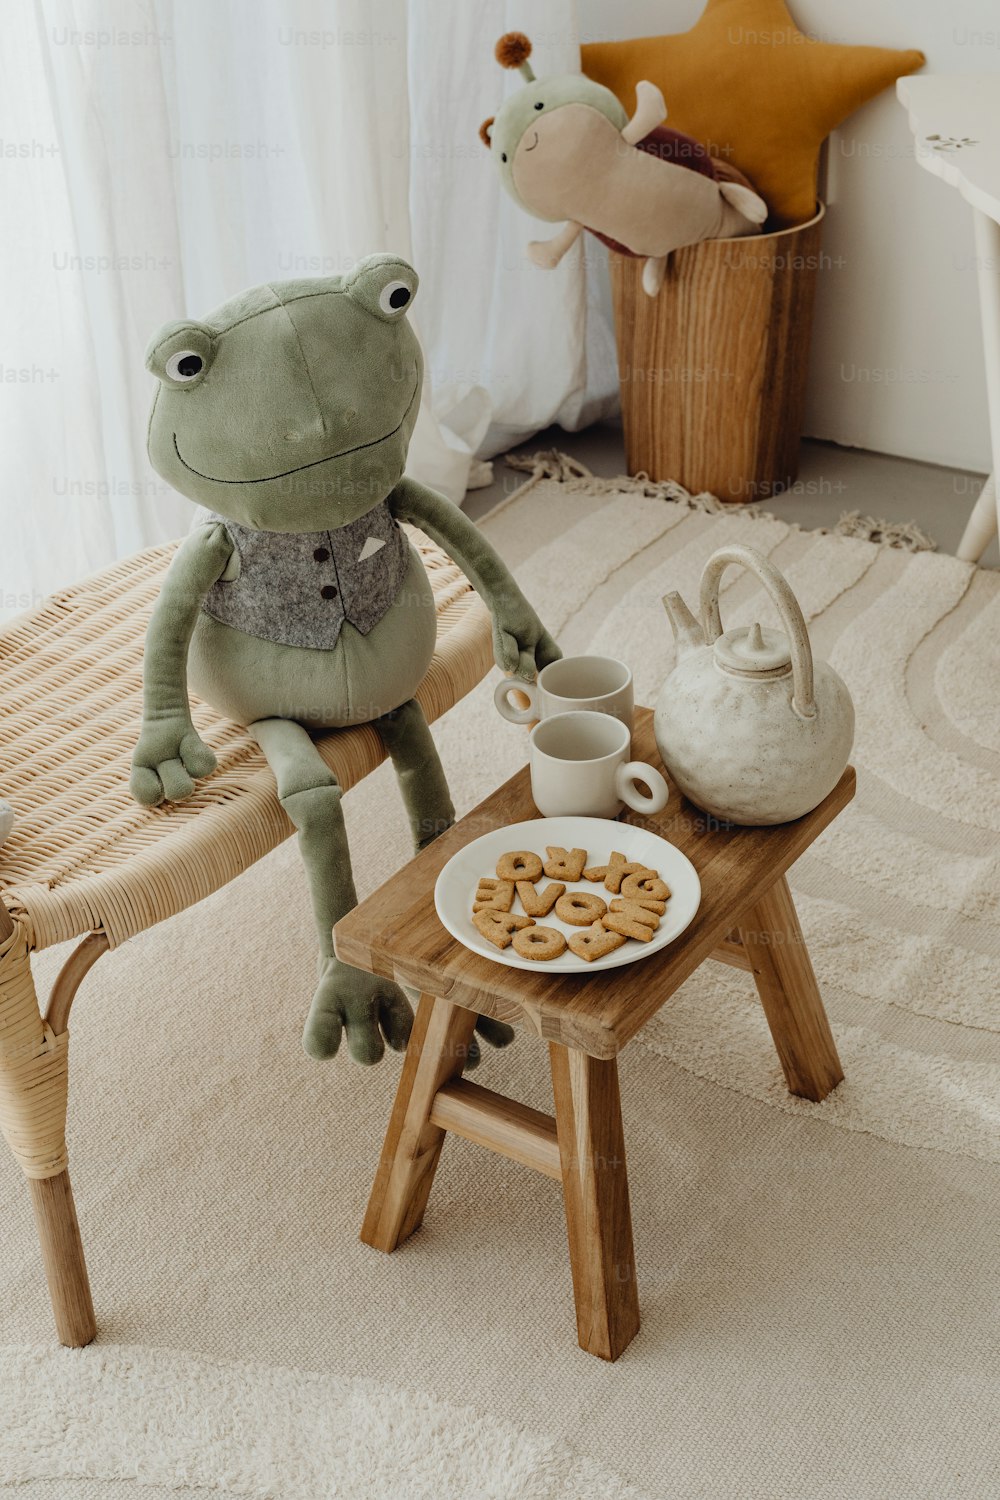 a frog sitting on a chair next to a plate of food